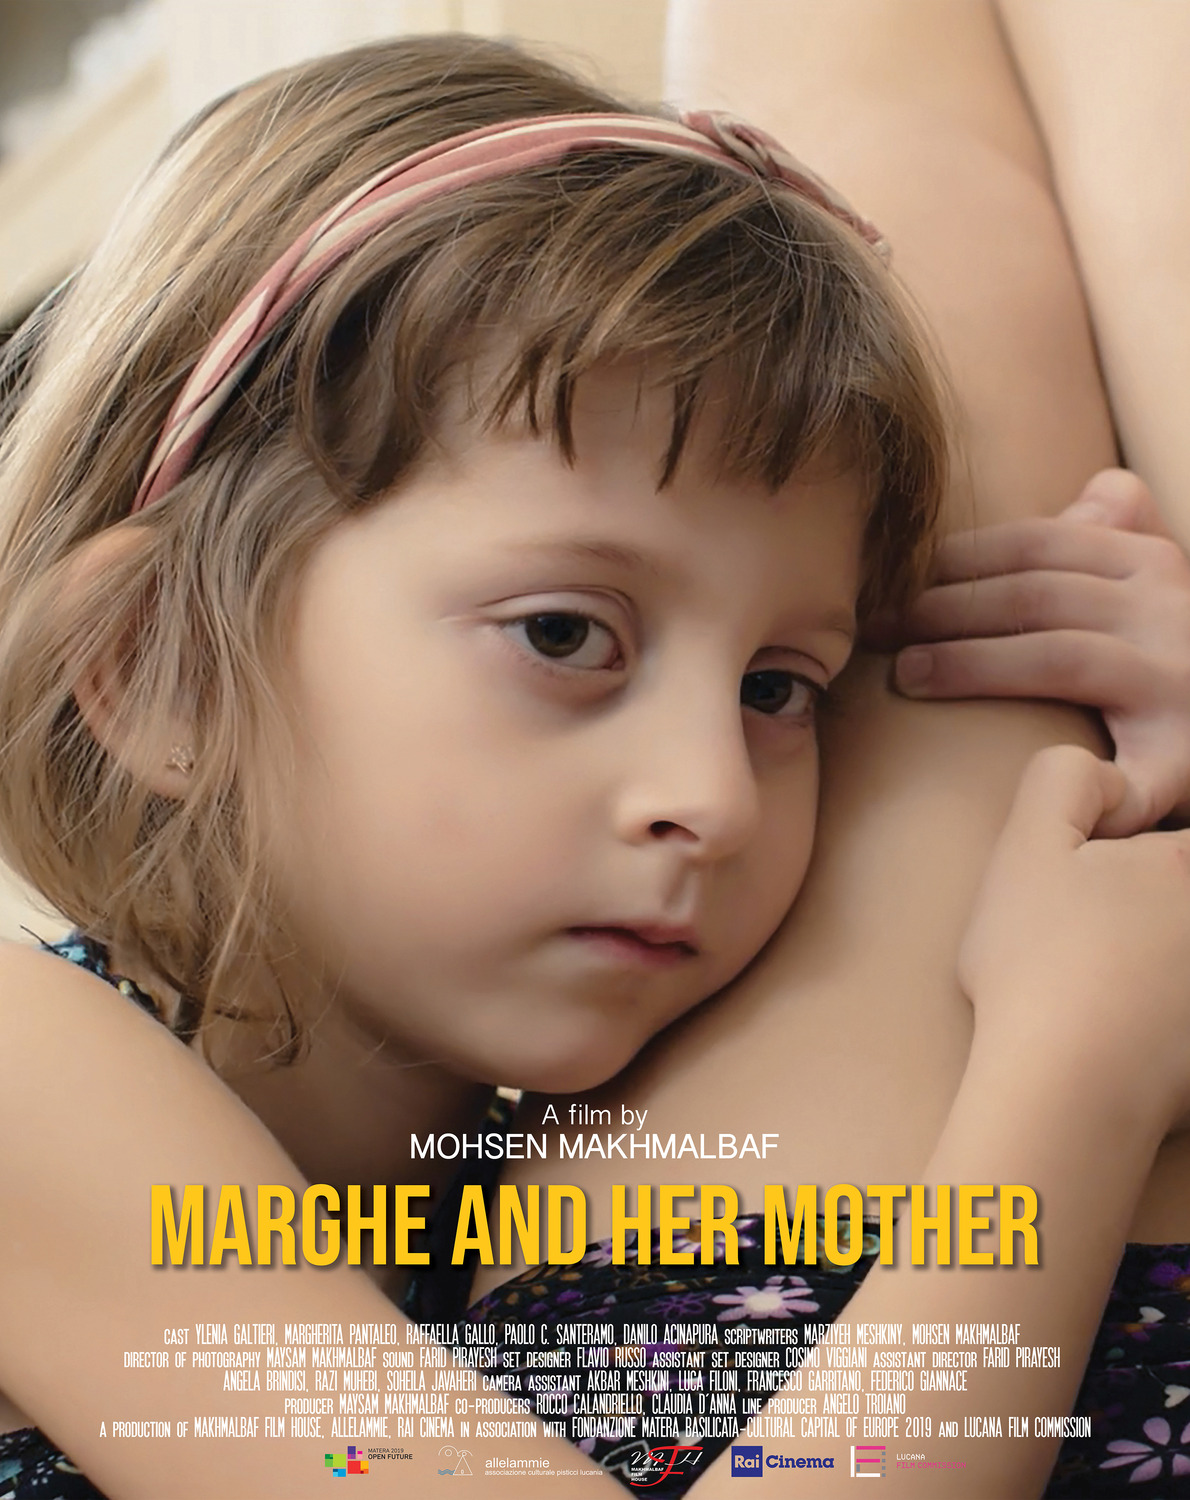 Extra Large Movie Poster Image for Marghe and her mother 